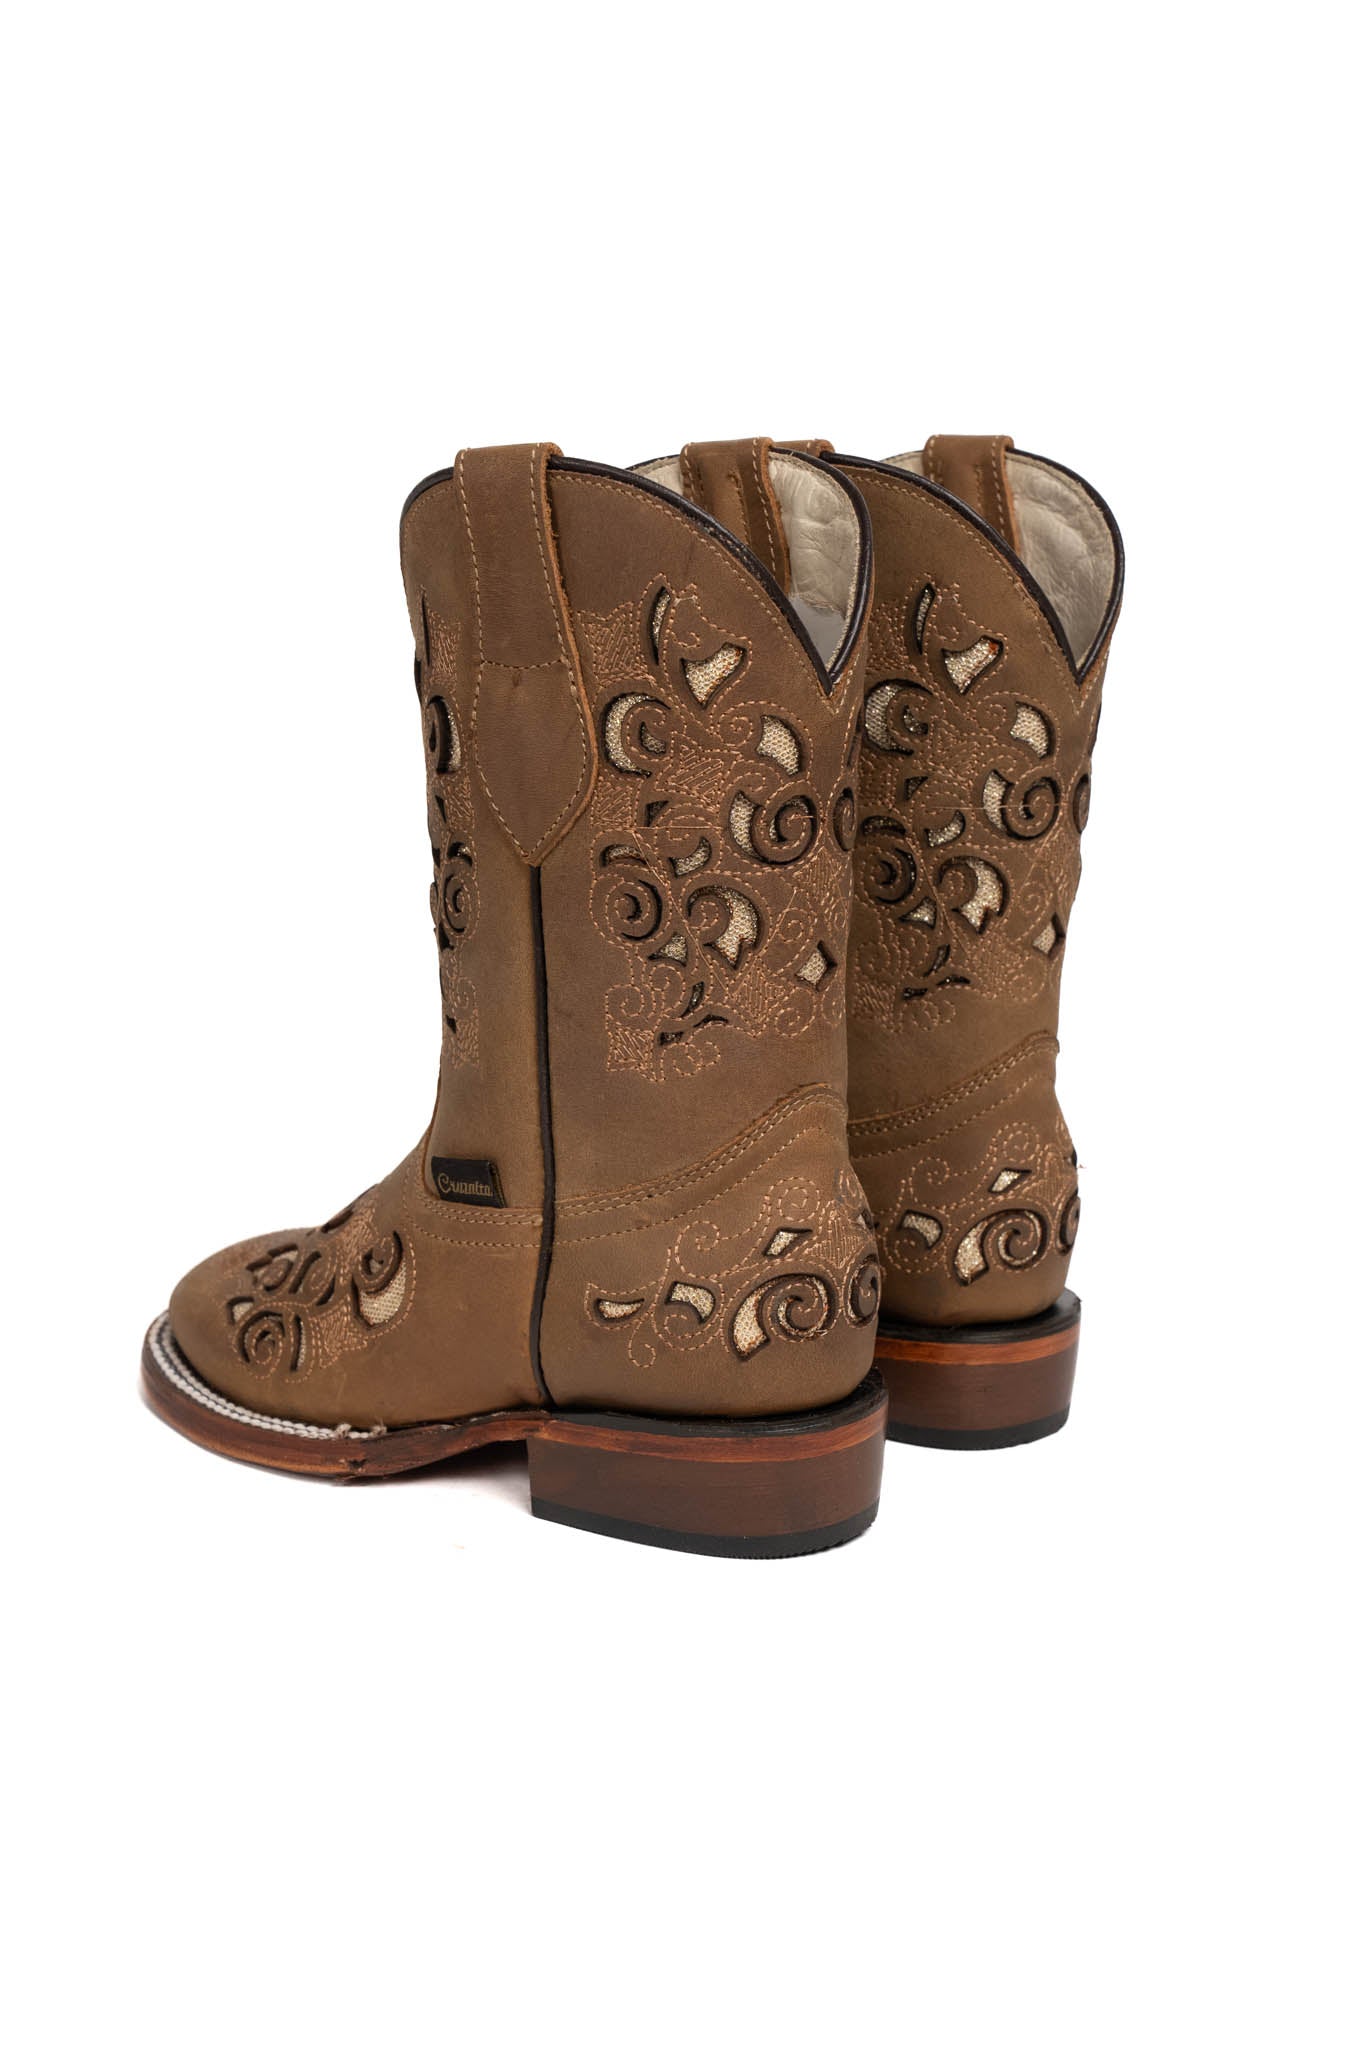 Little Campanas Tabaco Square Toe Cowgirl boot